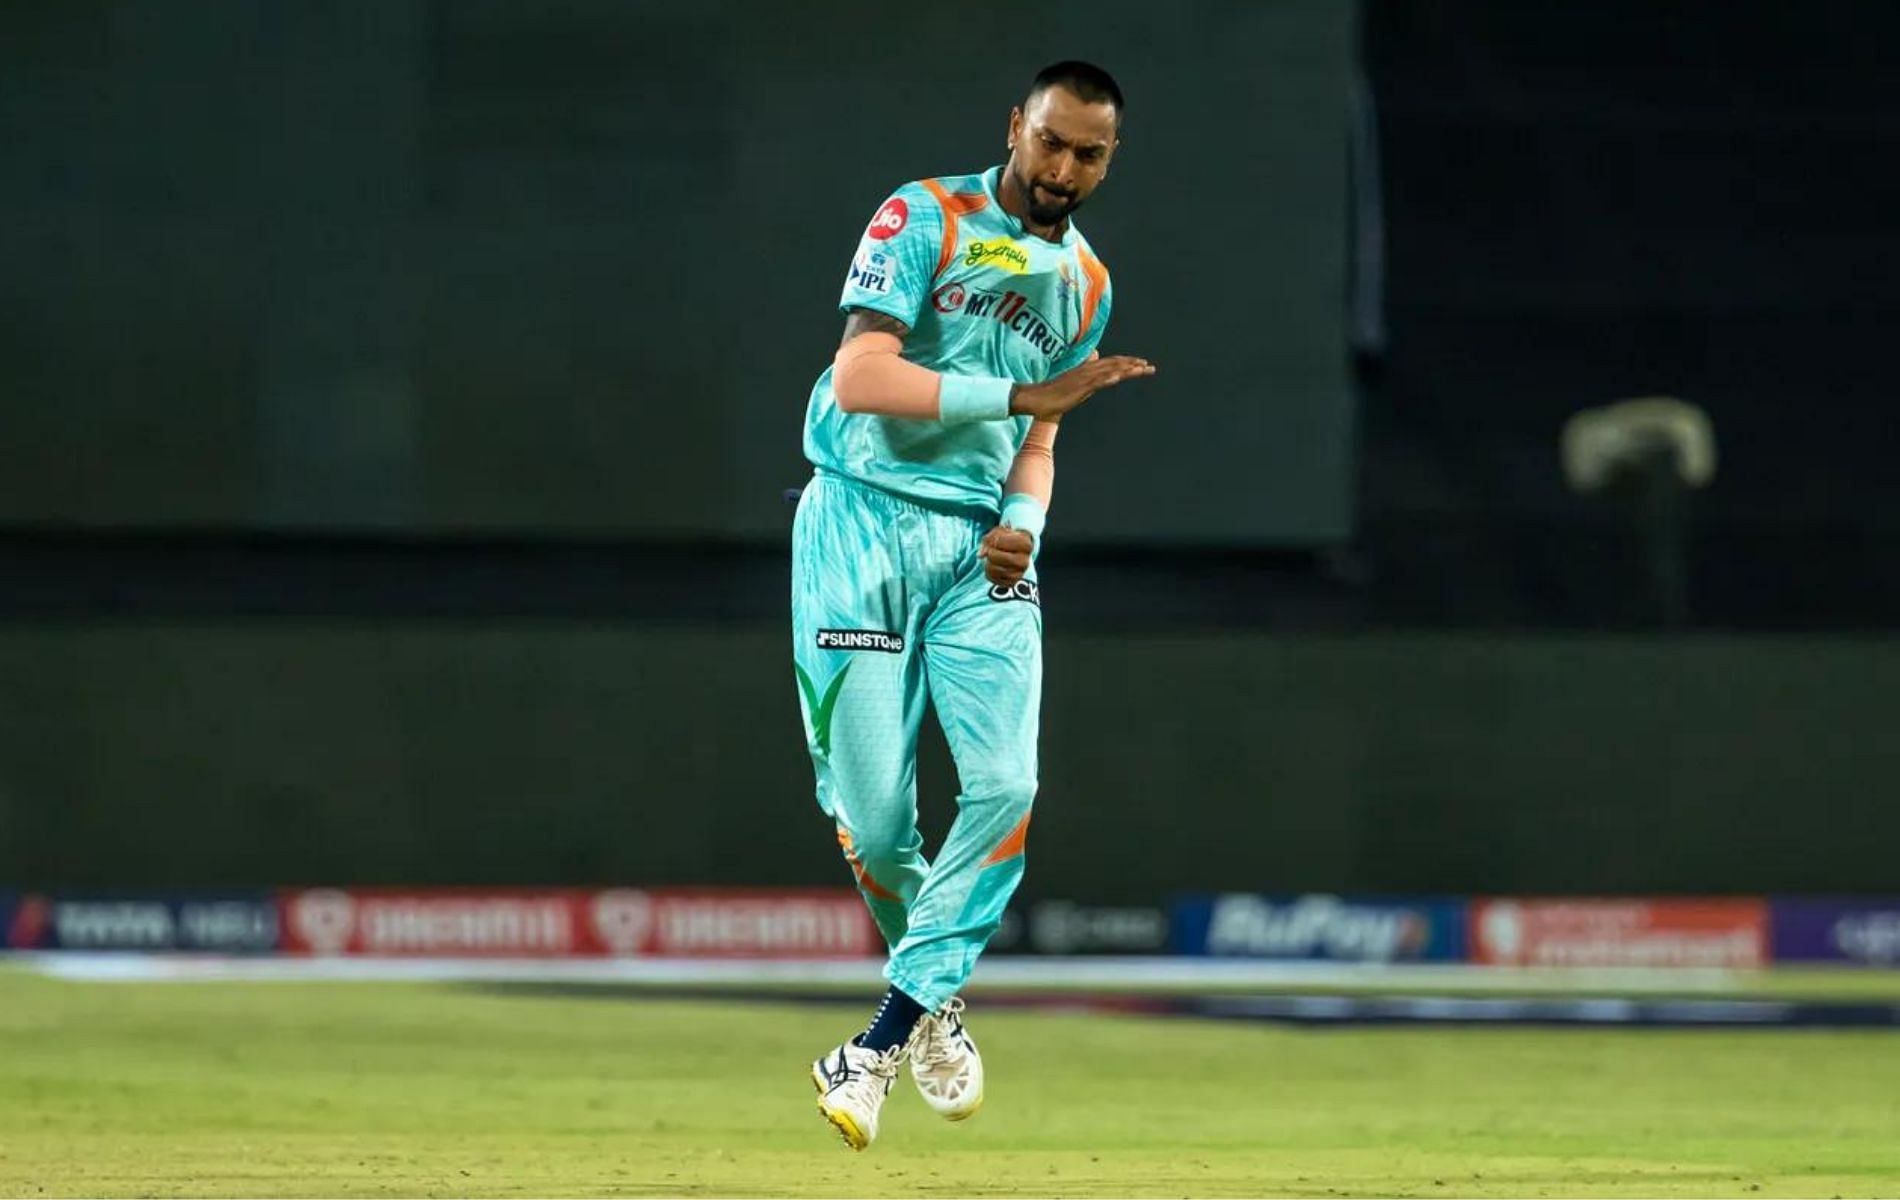 Krunal Pandya was the pick of the LSG bowlers on Friday (Image: IPLT20.com)